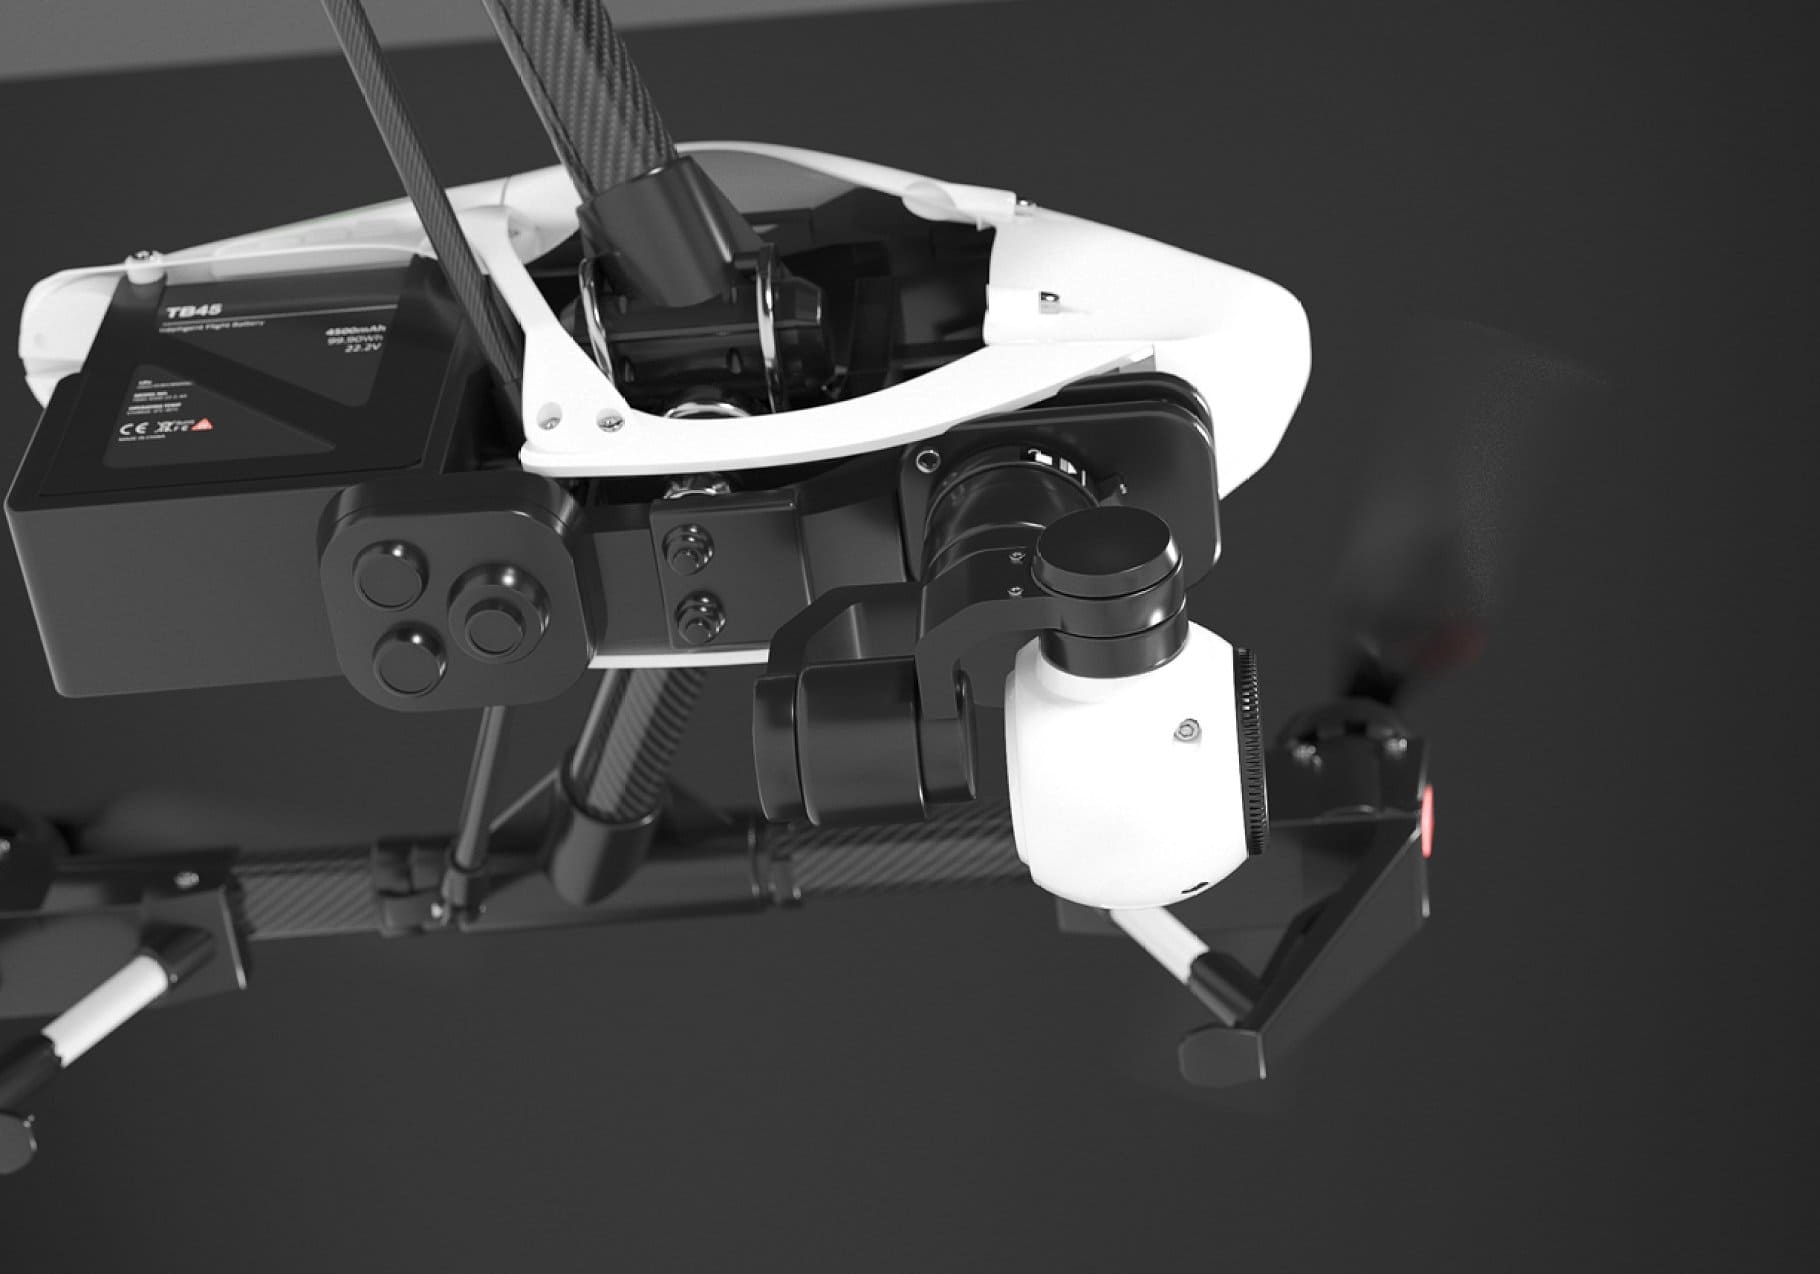 Part of the quadcopter is depicted on a black background.